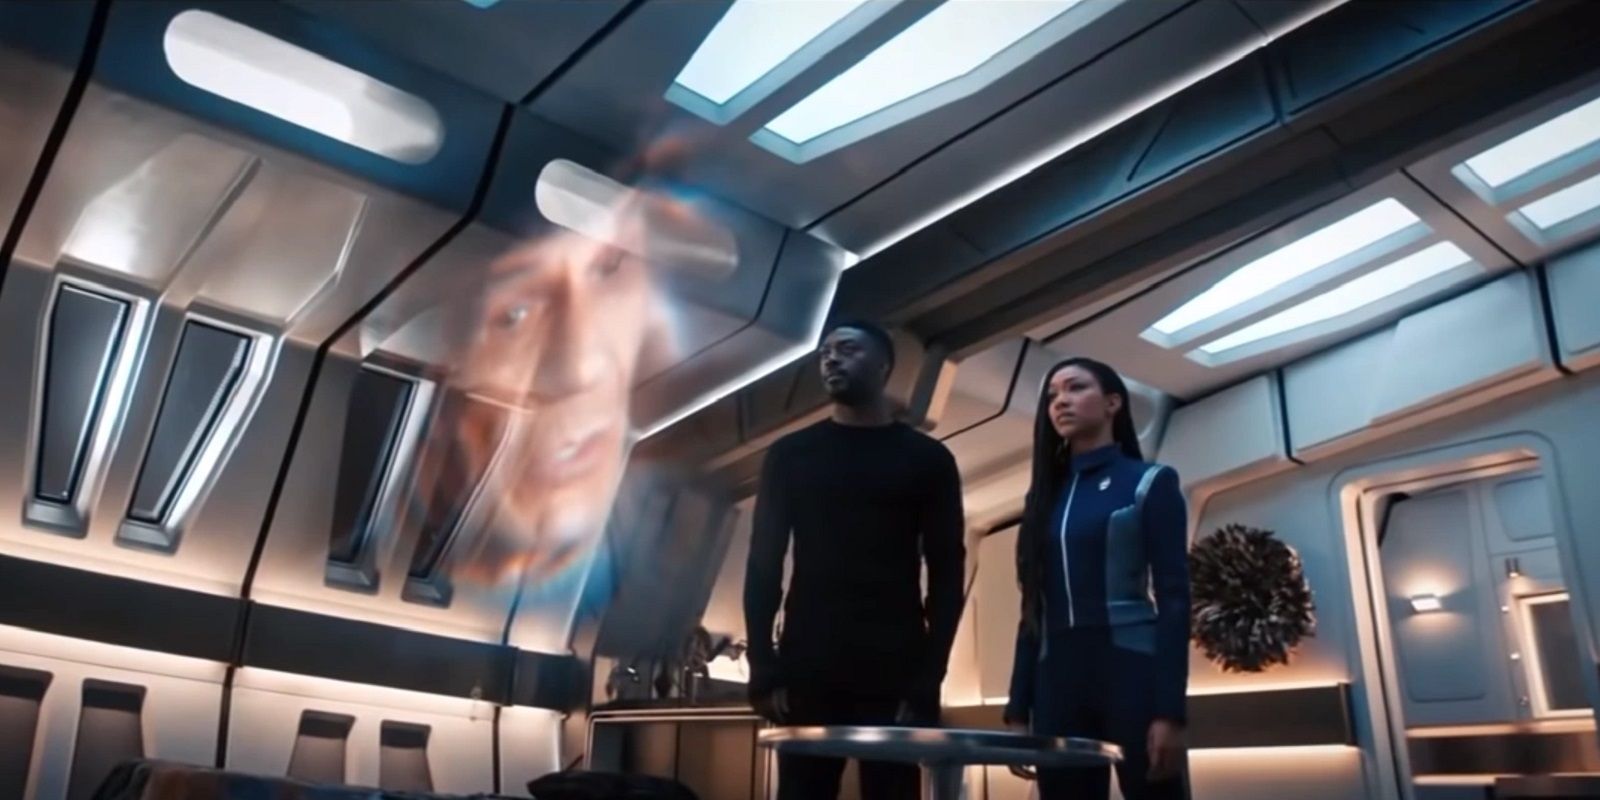 Michael Burnham and Cleveland Booker looking at a holographic image of Spock from TNG on Star Trek Discovery